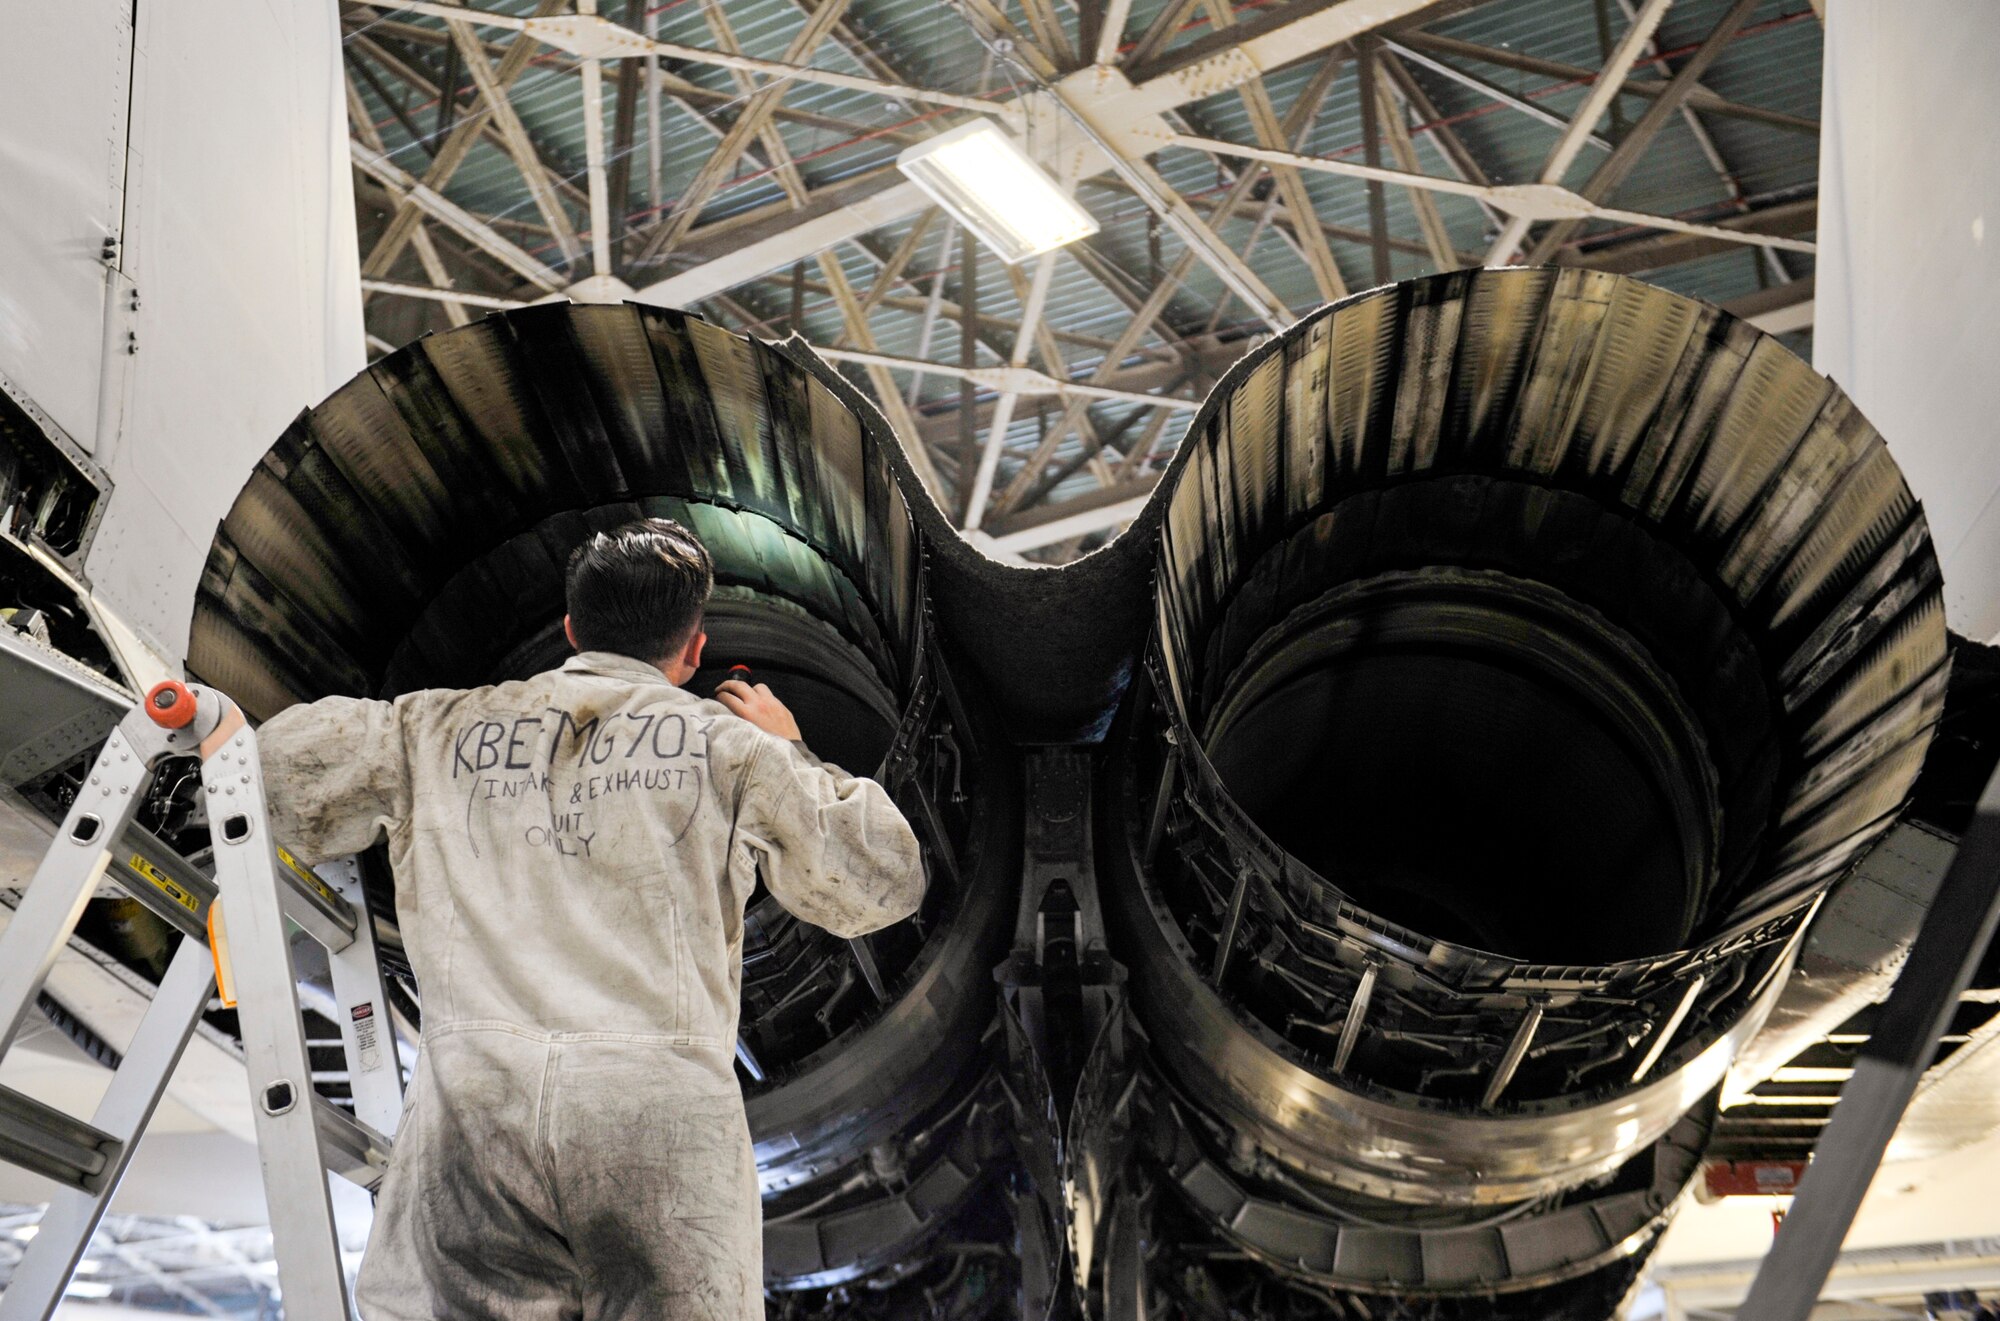 U.S. Air Force Airman 1st Class Shawn McMahon, engine specialist assigned to the 44th Air Maintenance Unit, inspects the inside of an F-15 Eagle during phase maintenance at Kadena Air Base, Japan, May 15, 2019.